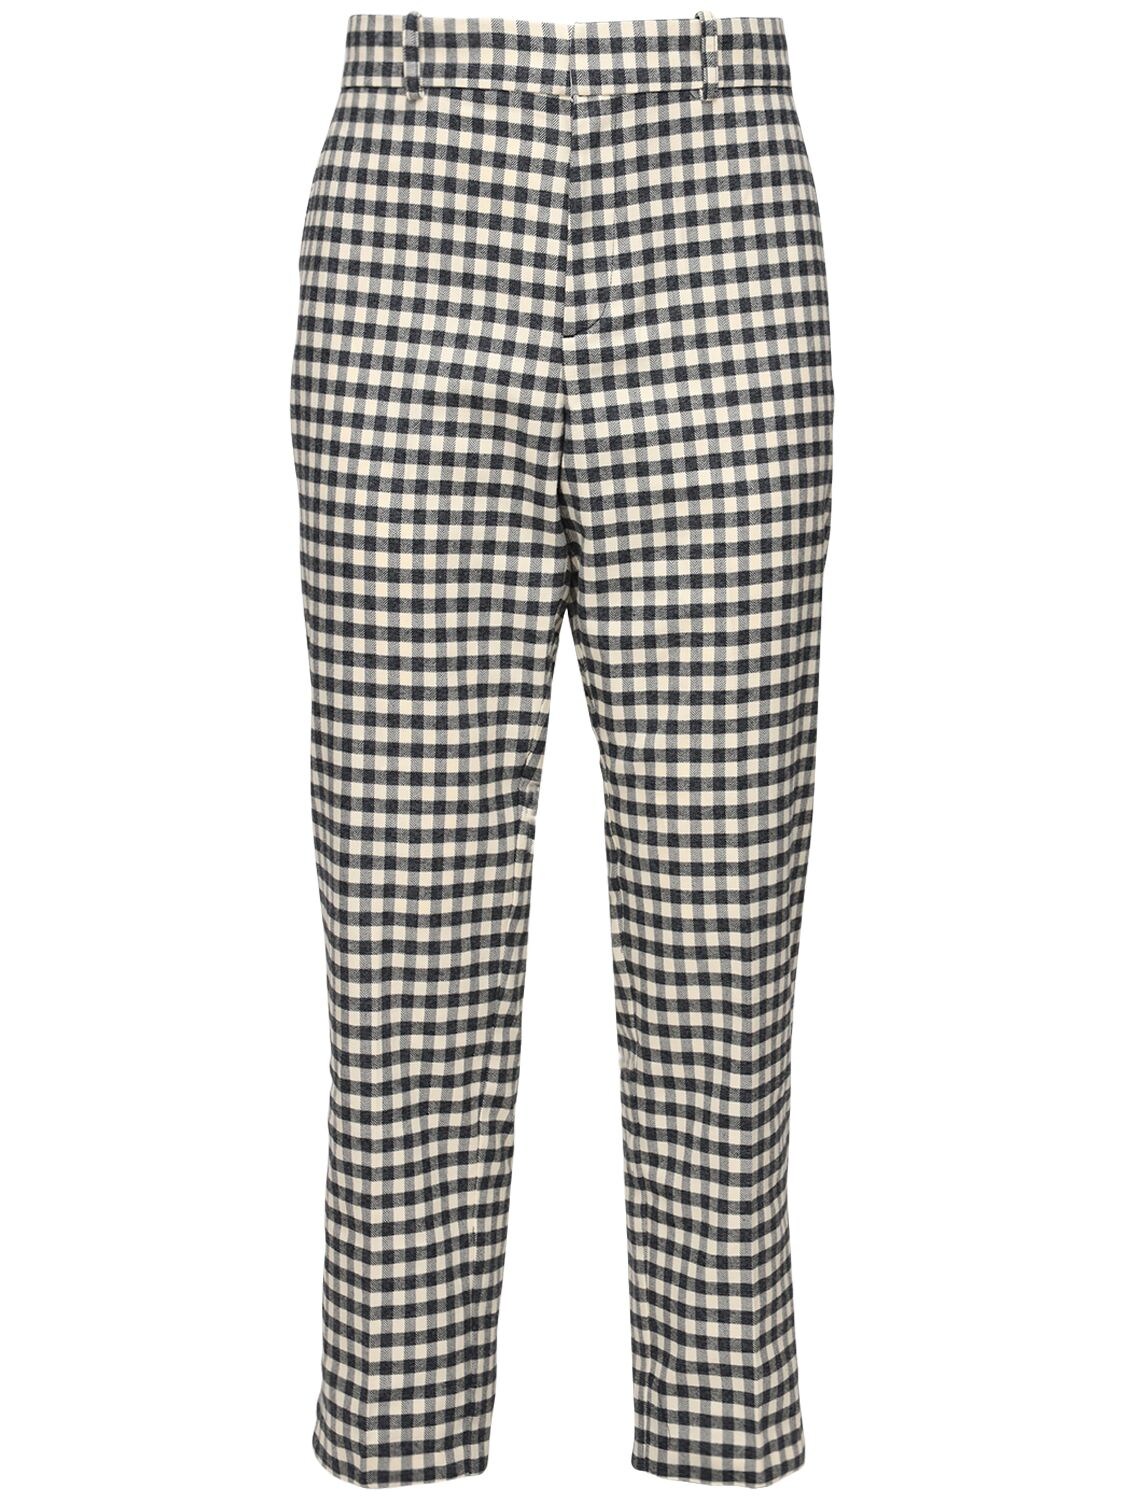 Soulland Tailored Cotton Gingham Pants In Multicolor